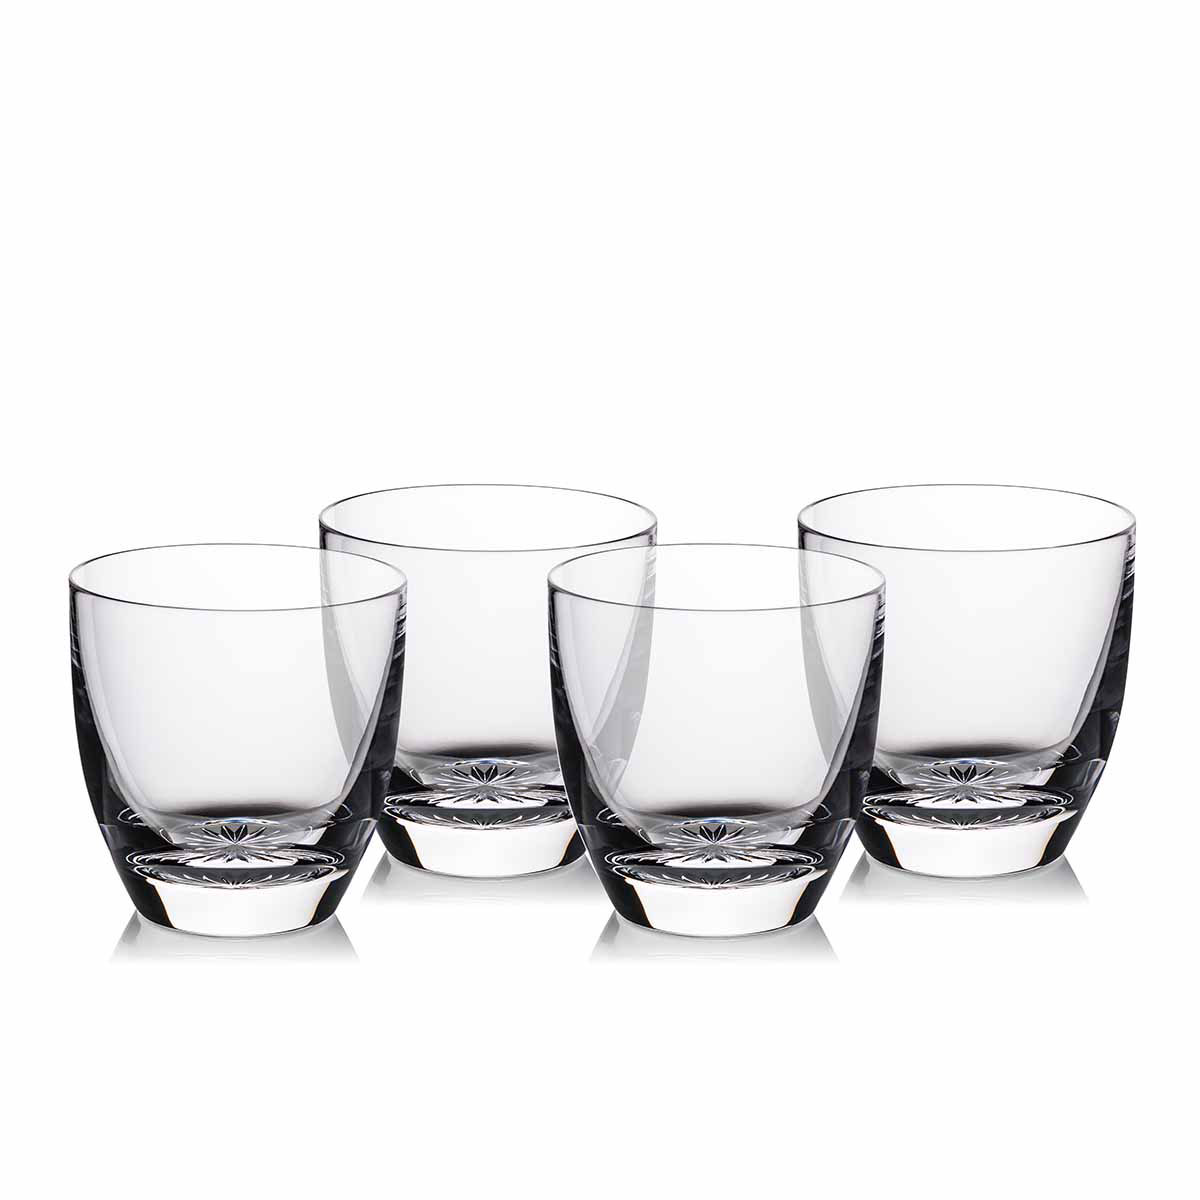 Marquis by Waterford Crystal, Ventura Tumbler, Set of 4